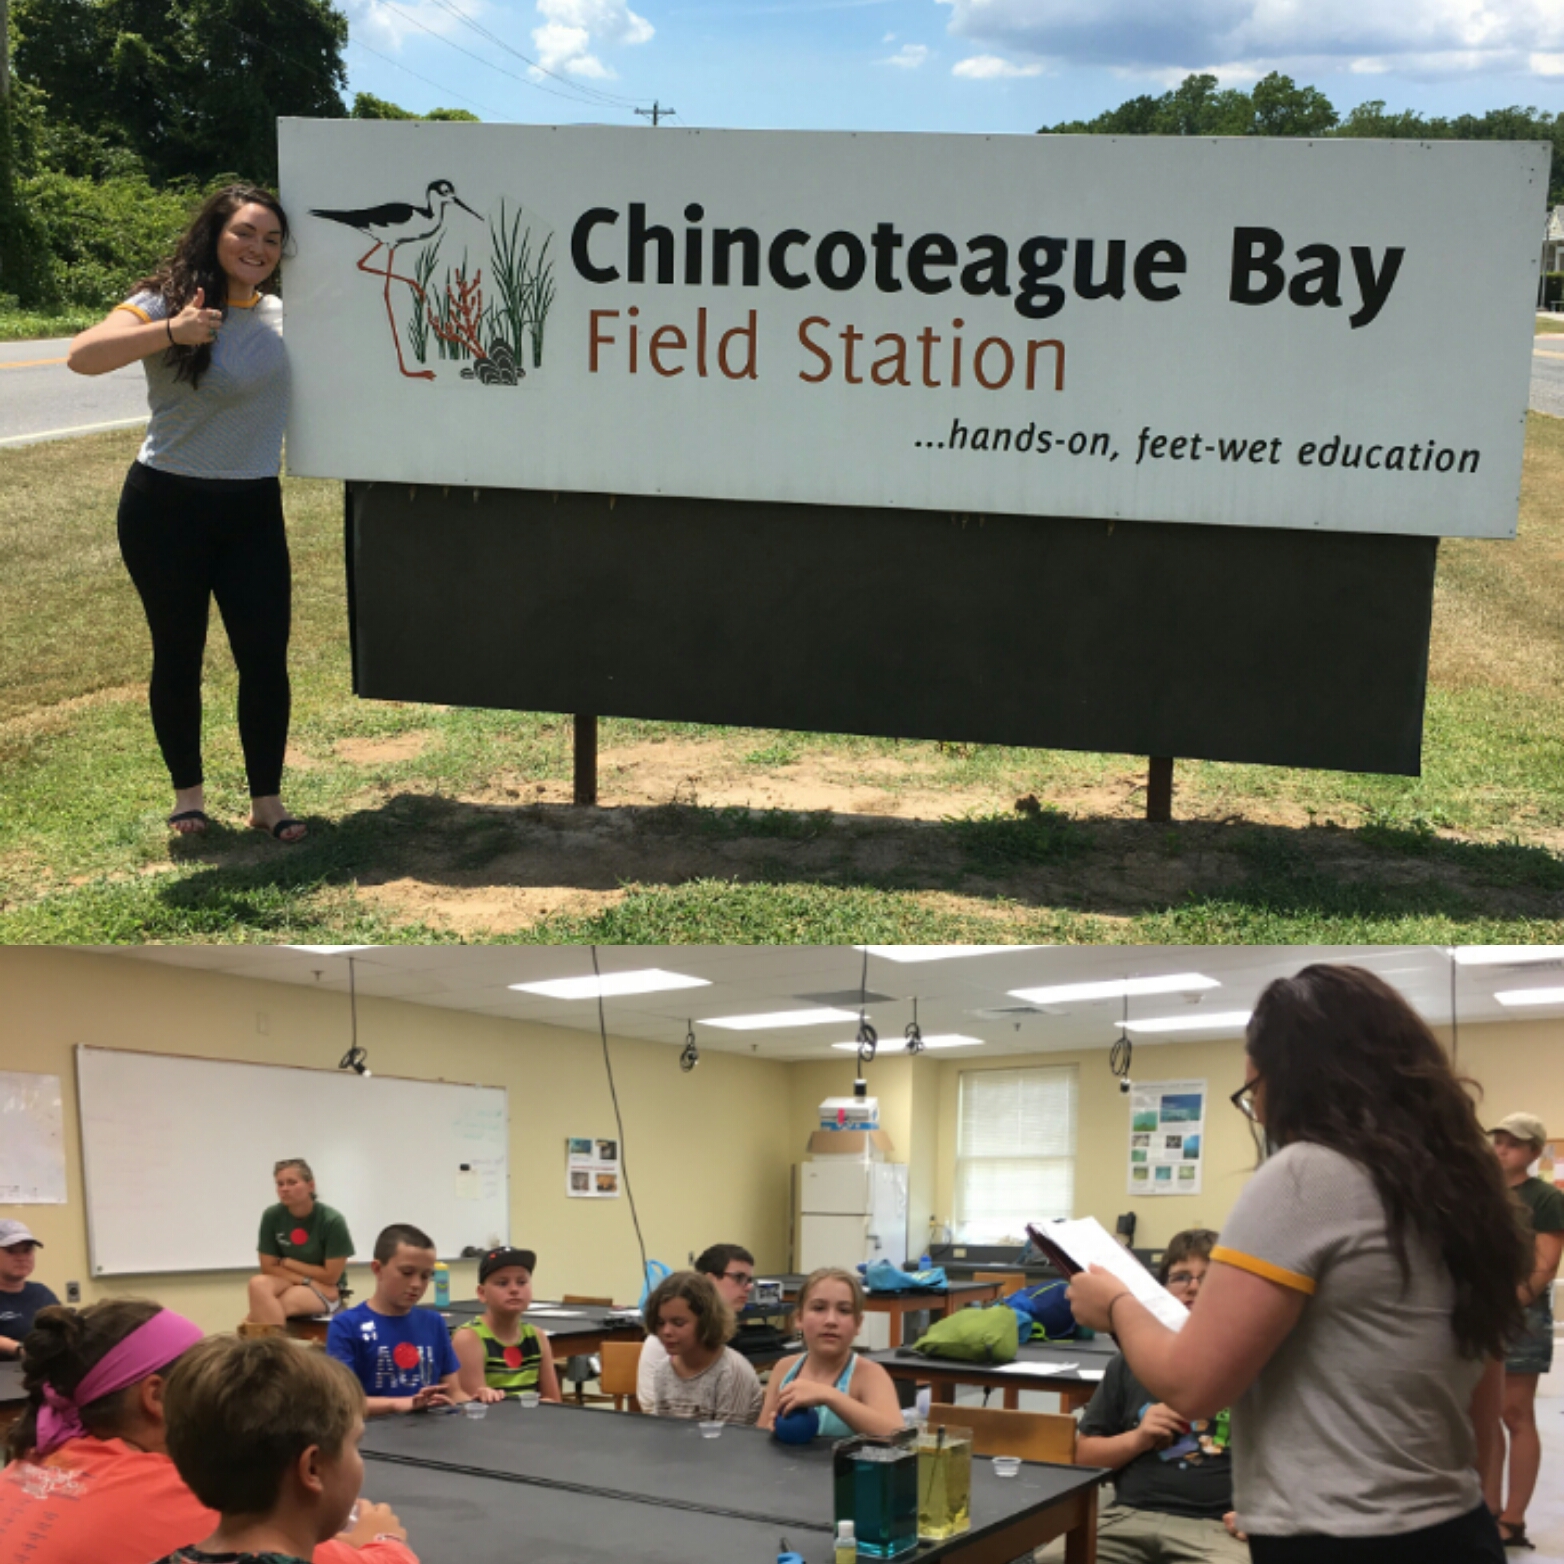 Annalise Guthrie, 2018 EPP Scholar, interned this summer in Washington, D.C., creating outreach tools that could help scientists successfully communicate ocean acidification to K-12 students. At the Chincoteague Field Station Science Day Camp in Wallops Island, Virginia, she tested the effectiveness of these tools.